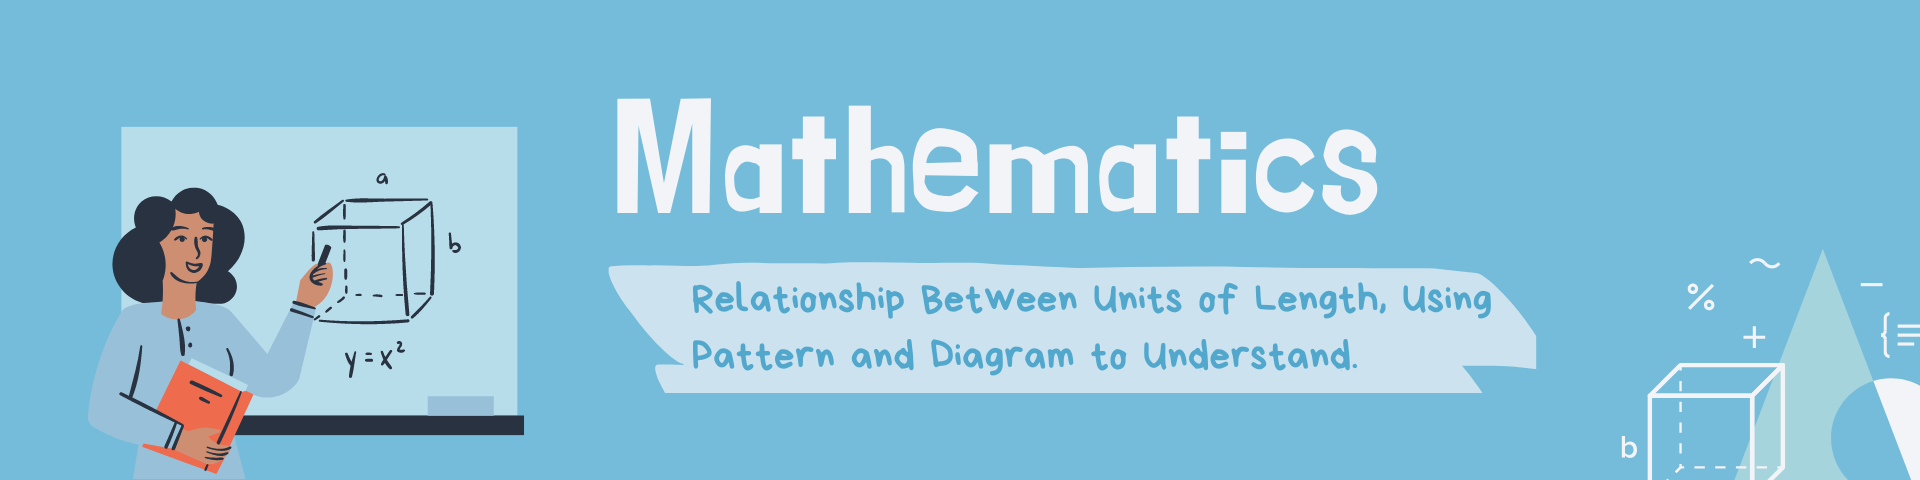 Relationship Between Units of Length, Using Pattern and Diagram to Understand. 